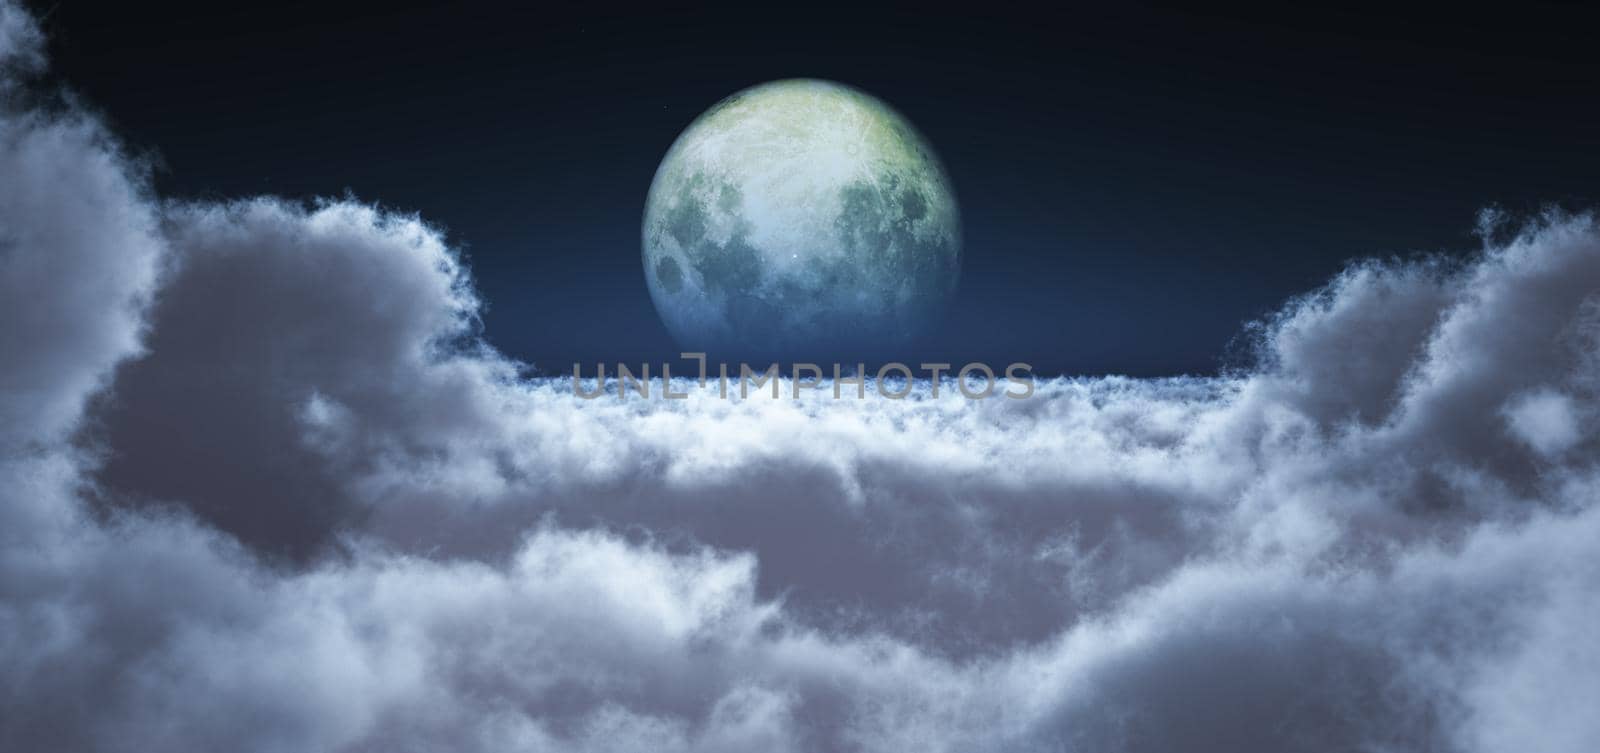 night fly above clouds full moon by alex_nako